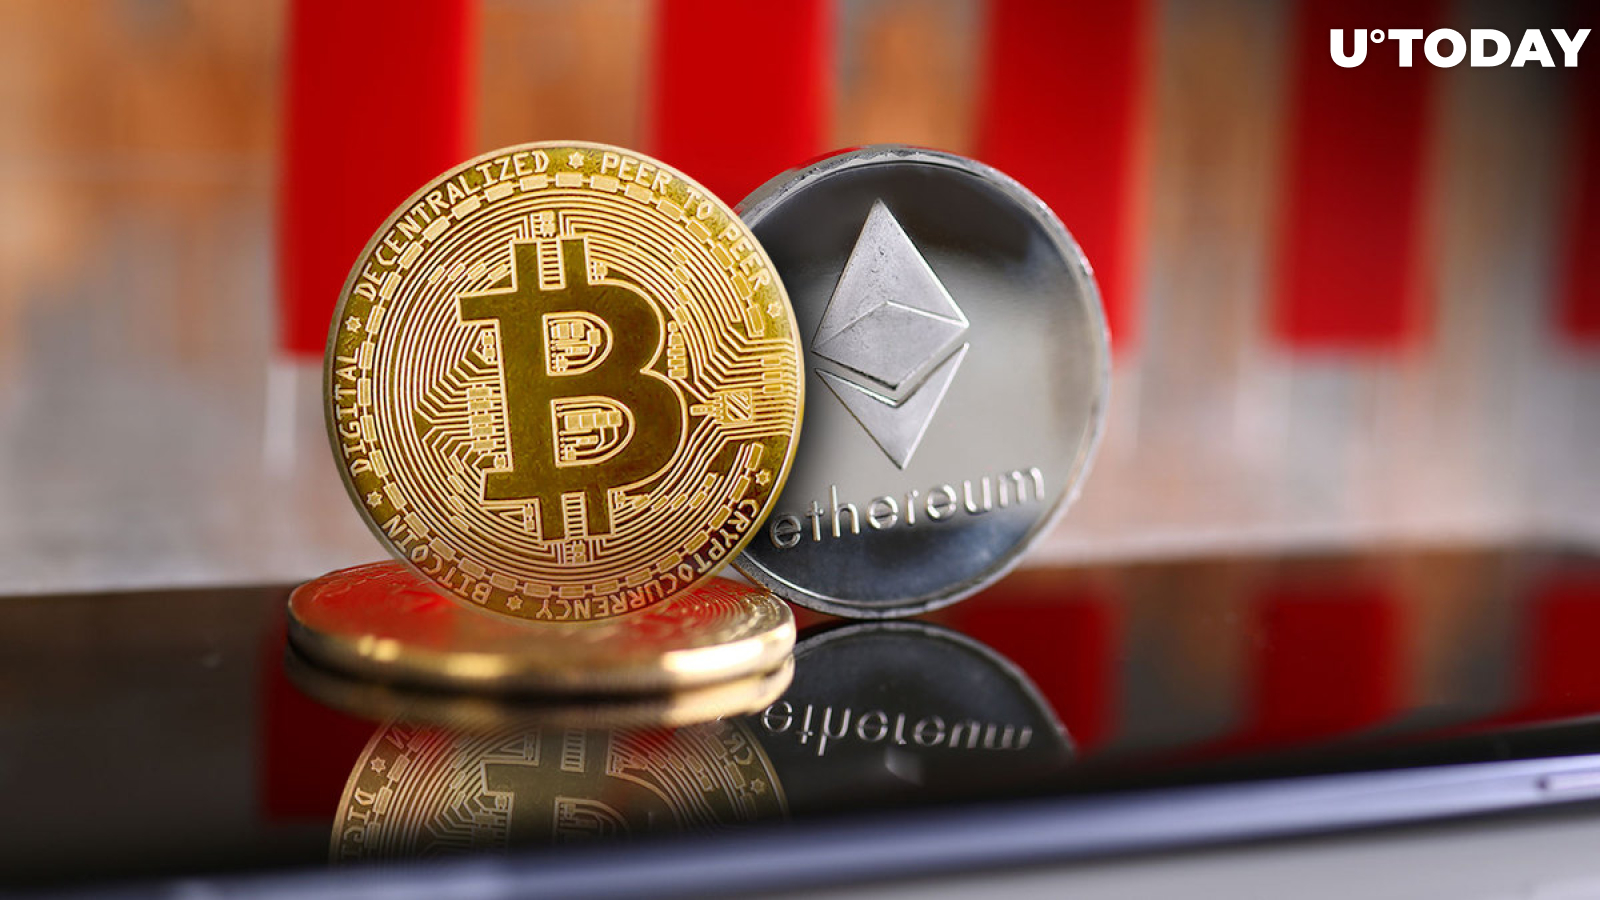 Ethereum (ETH) Inflation Losing to Bitcoin's (BTC)